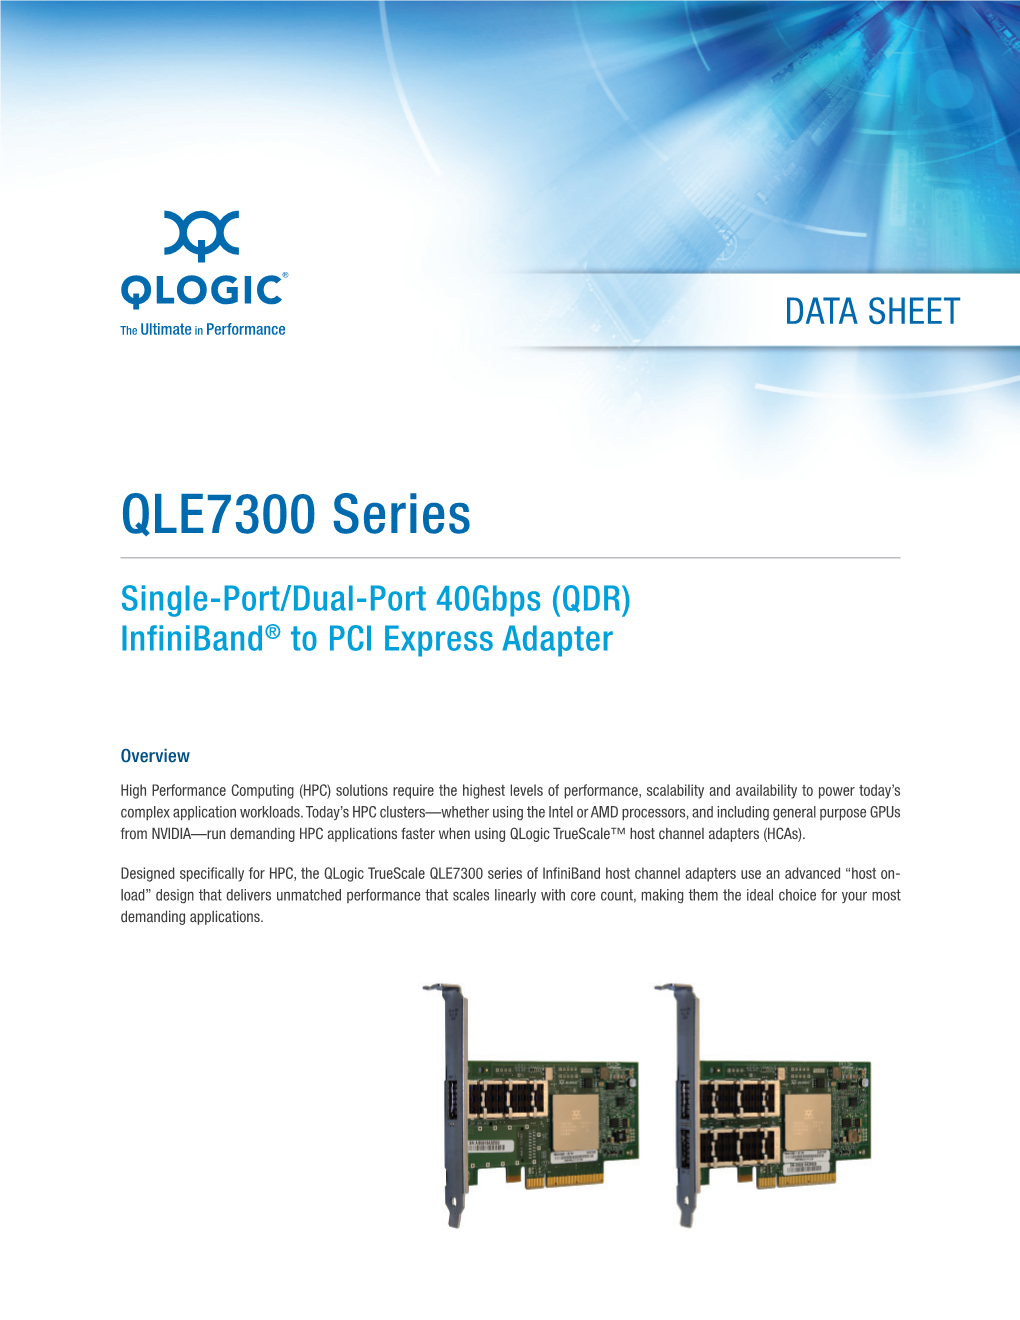 Data Sheet for QLE7300 Series Infiniband to PCI Express Host